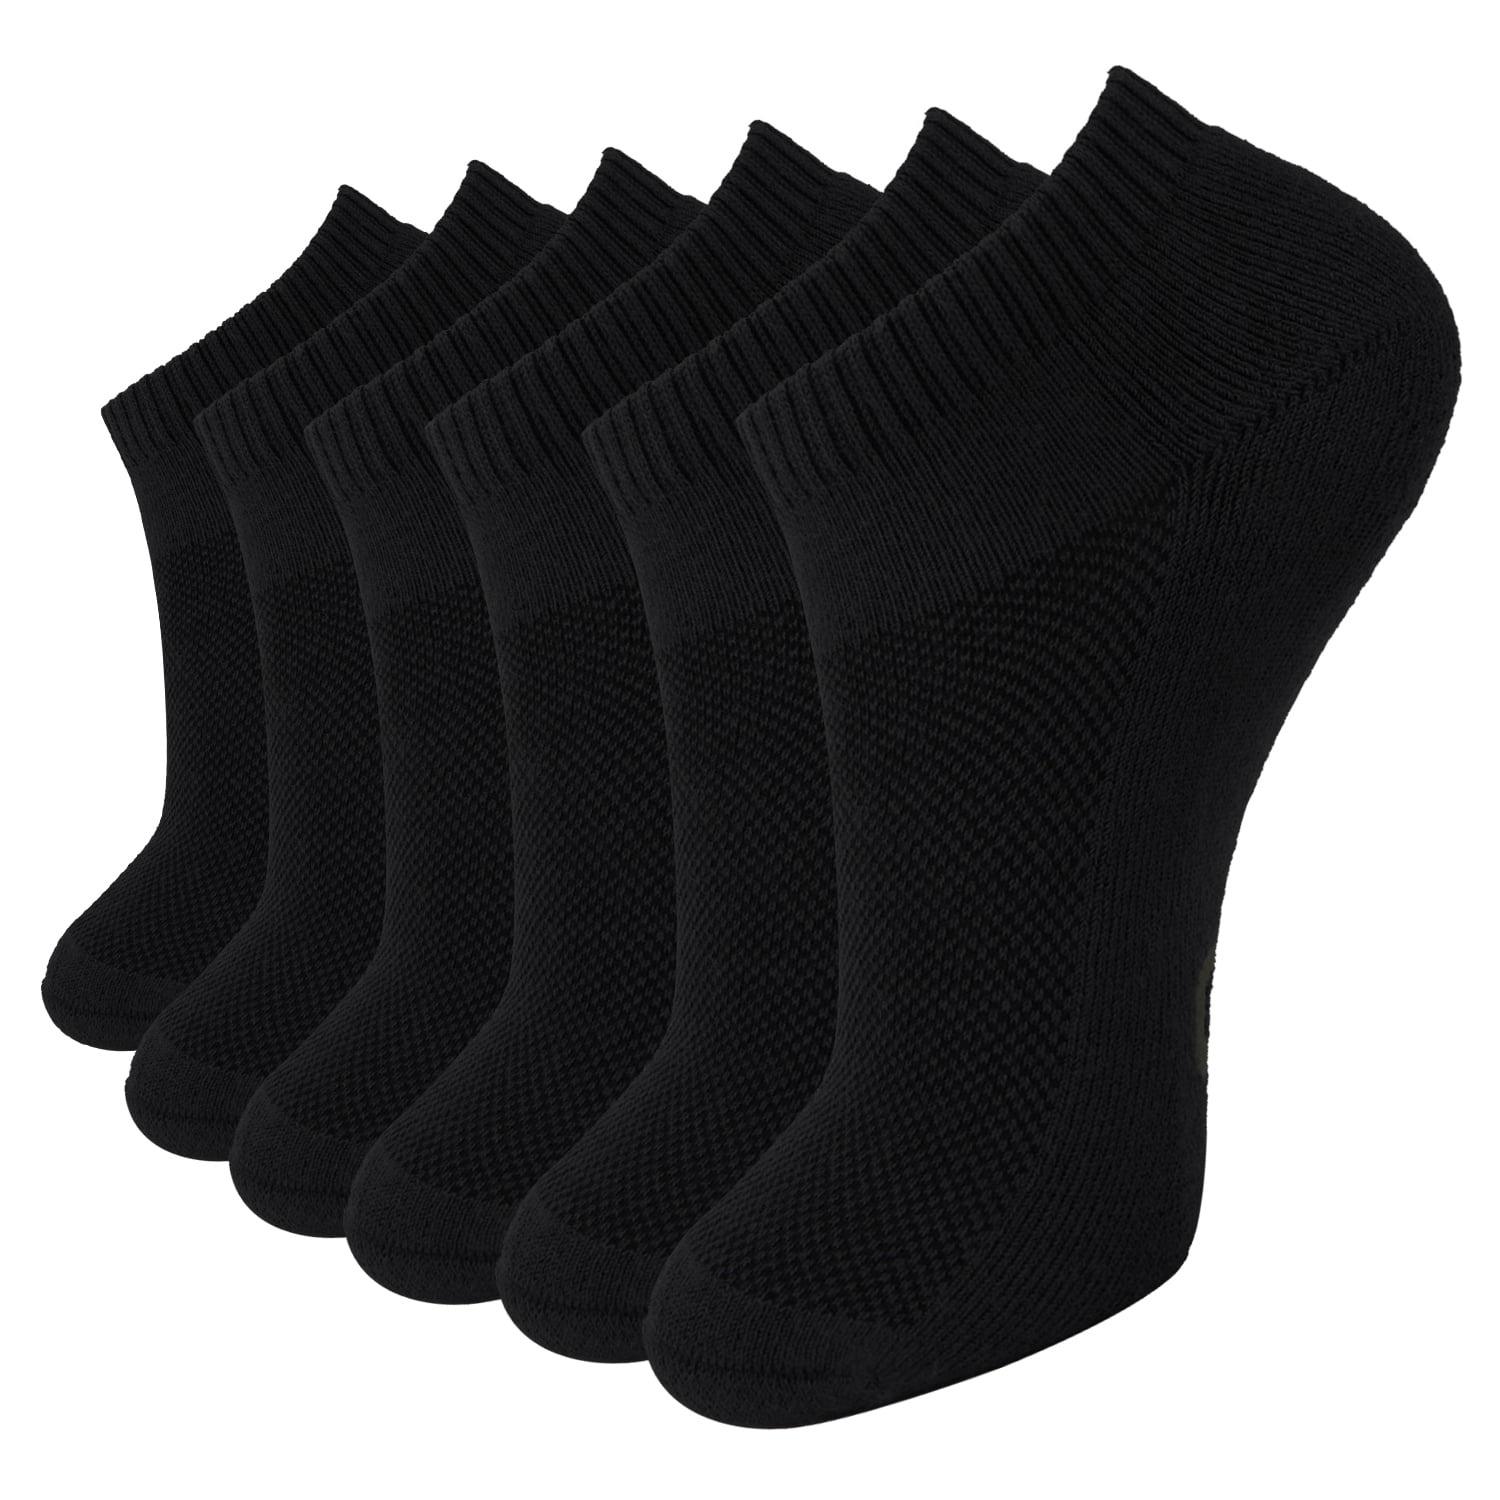 +MD 6 Pack No Show Socks for Men Bamboo Socks Moisture Wicking & Odor Control Low Cut Athletic Socks